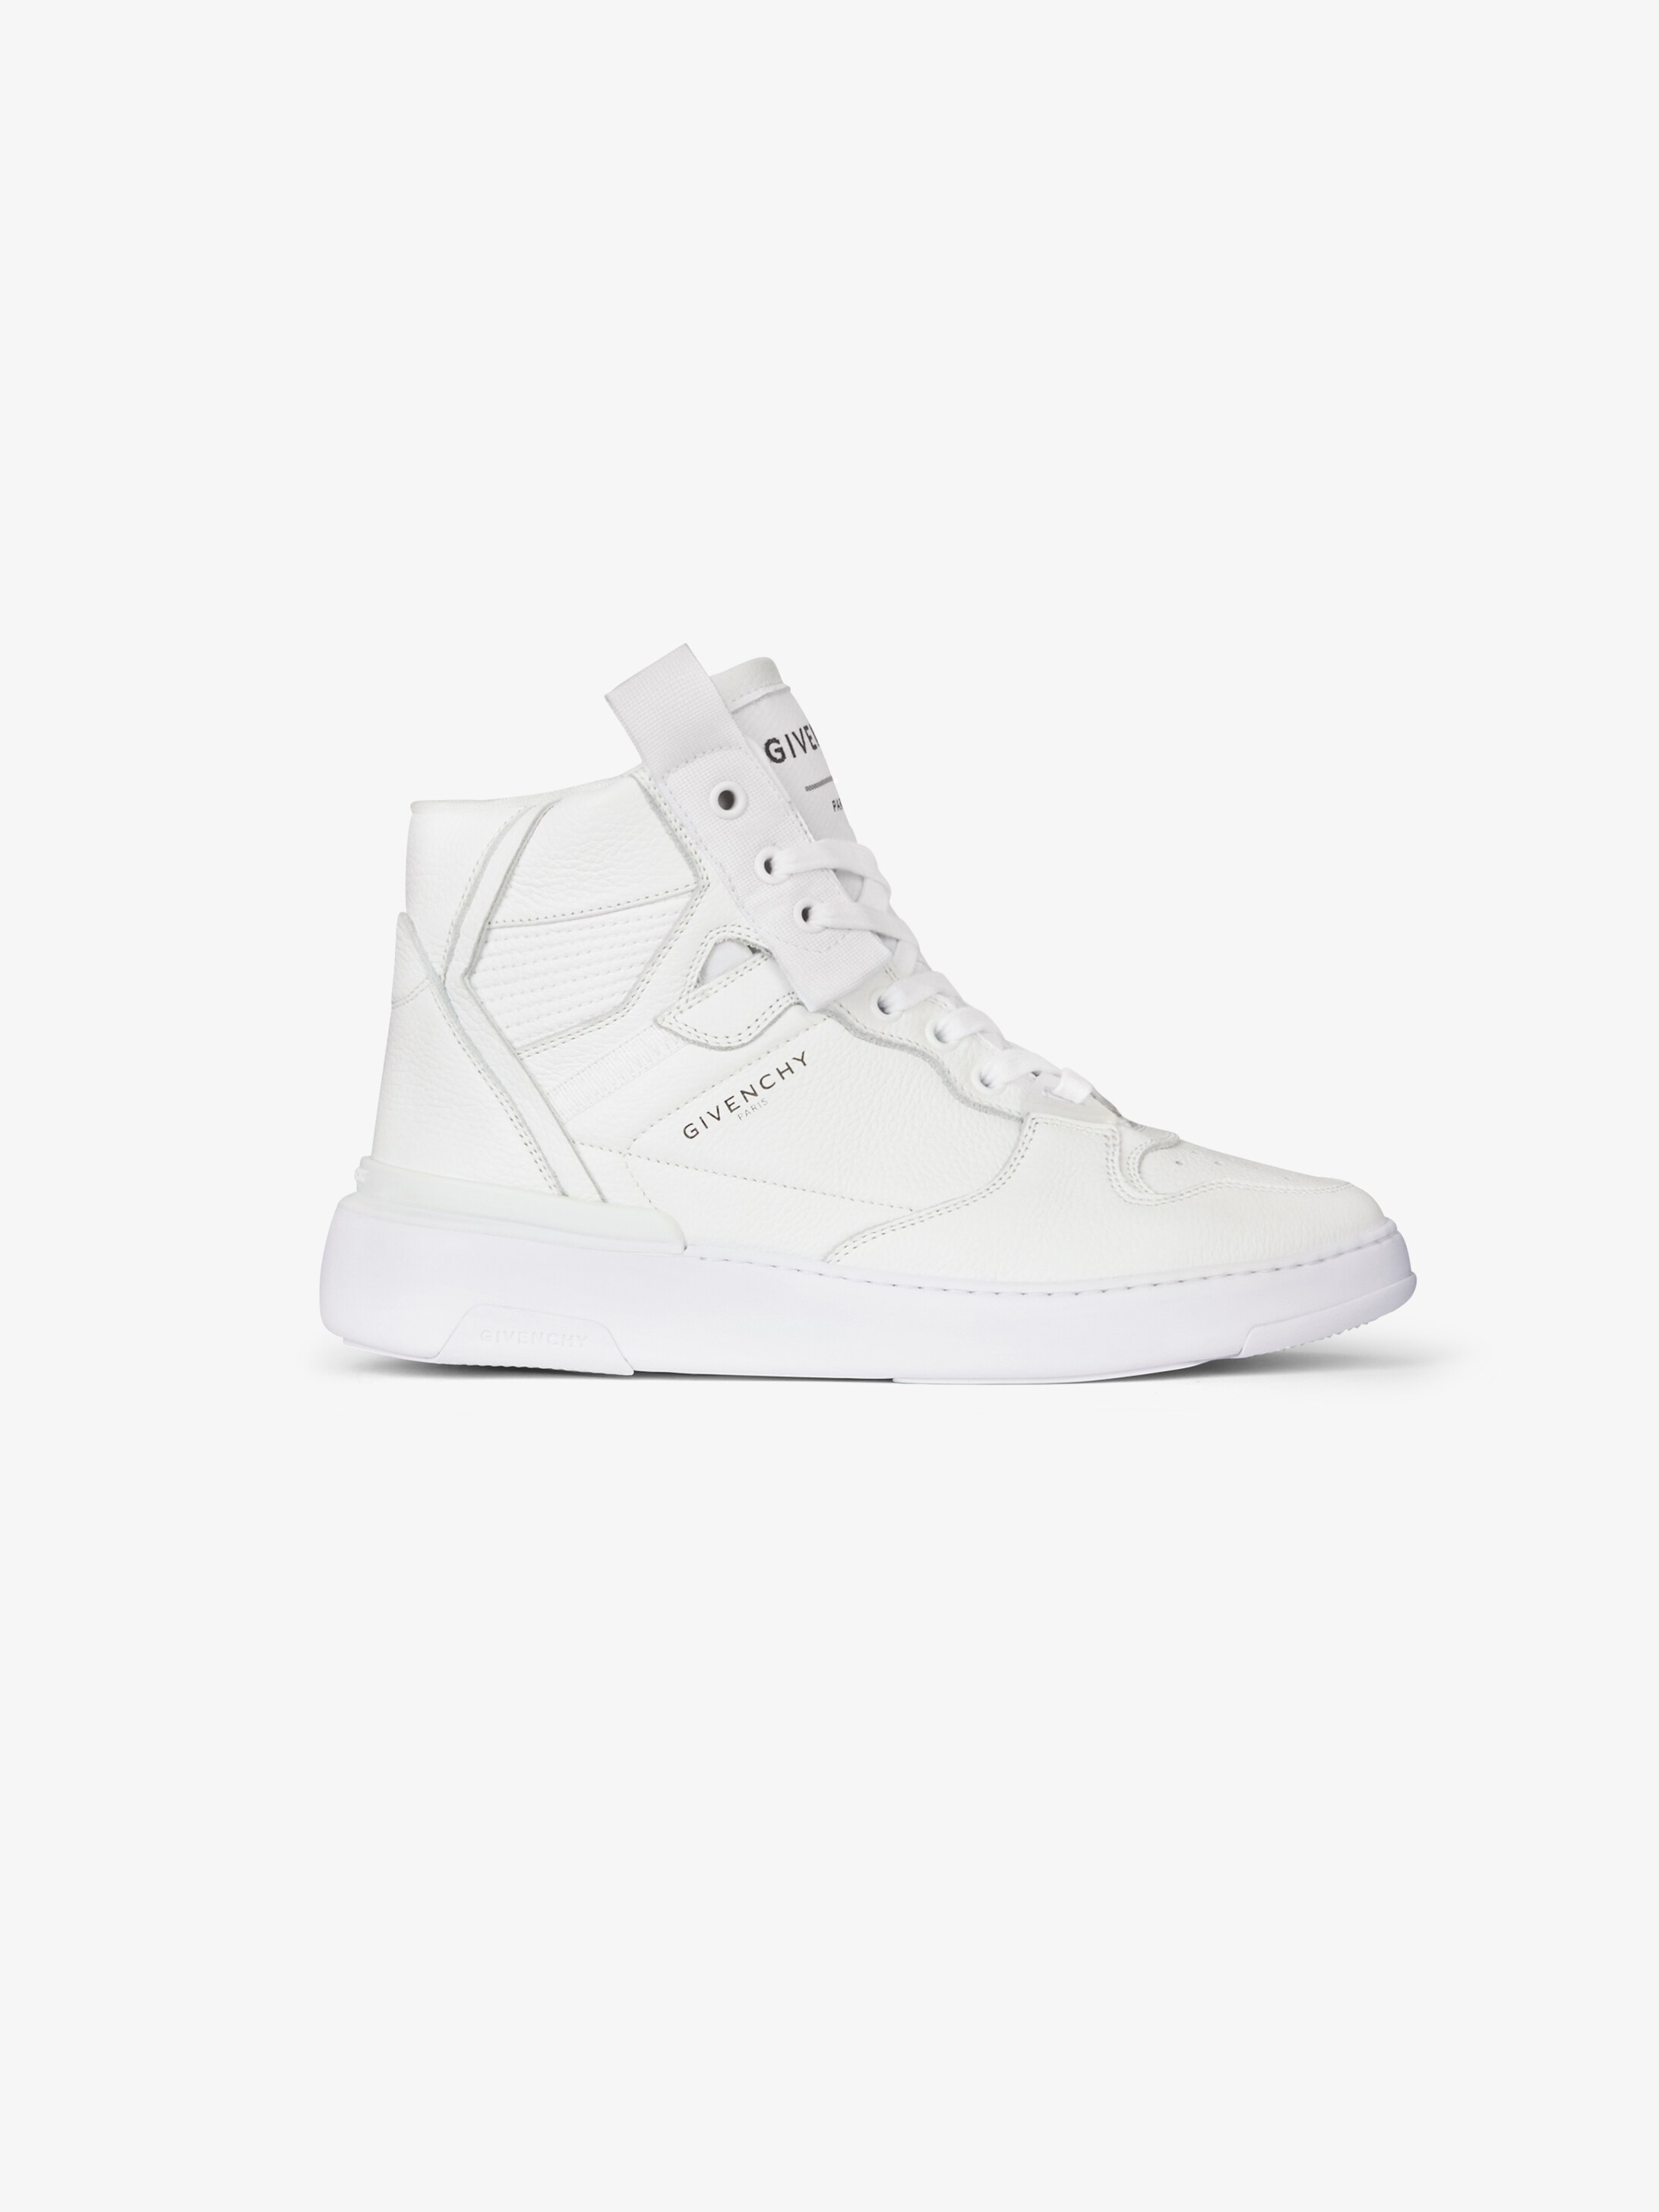 Wing mid sneakers in leather | GIVENCHY 